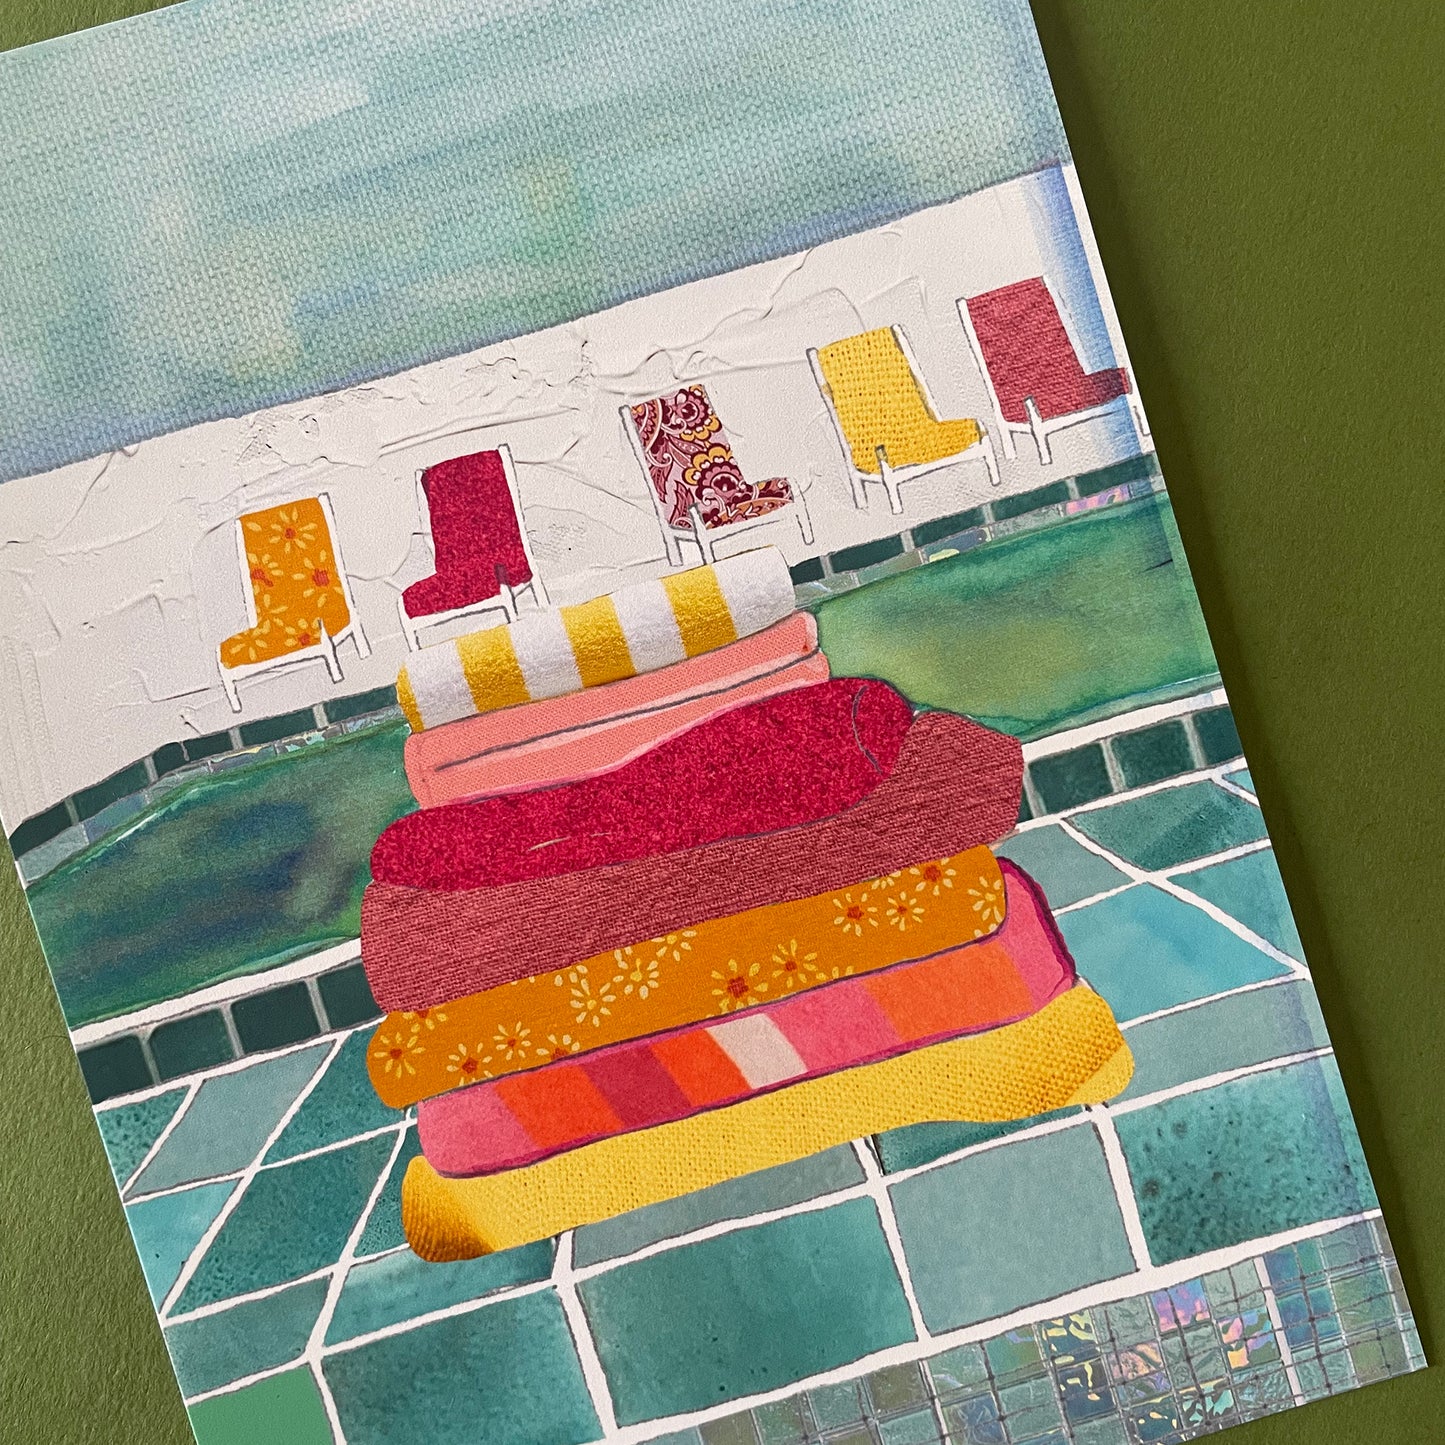 Close up detail of an illustration of a poolside featuring a stack of colourful towels and some chairs.